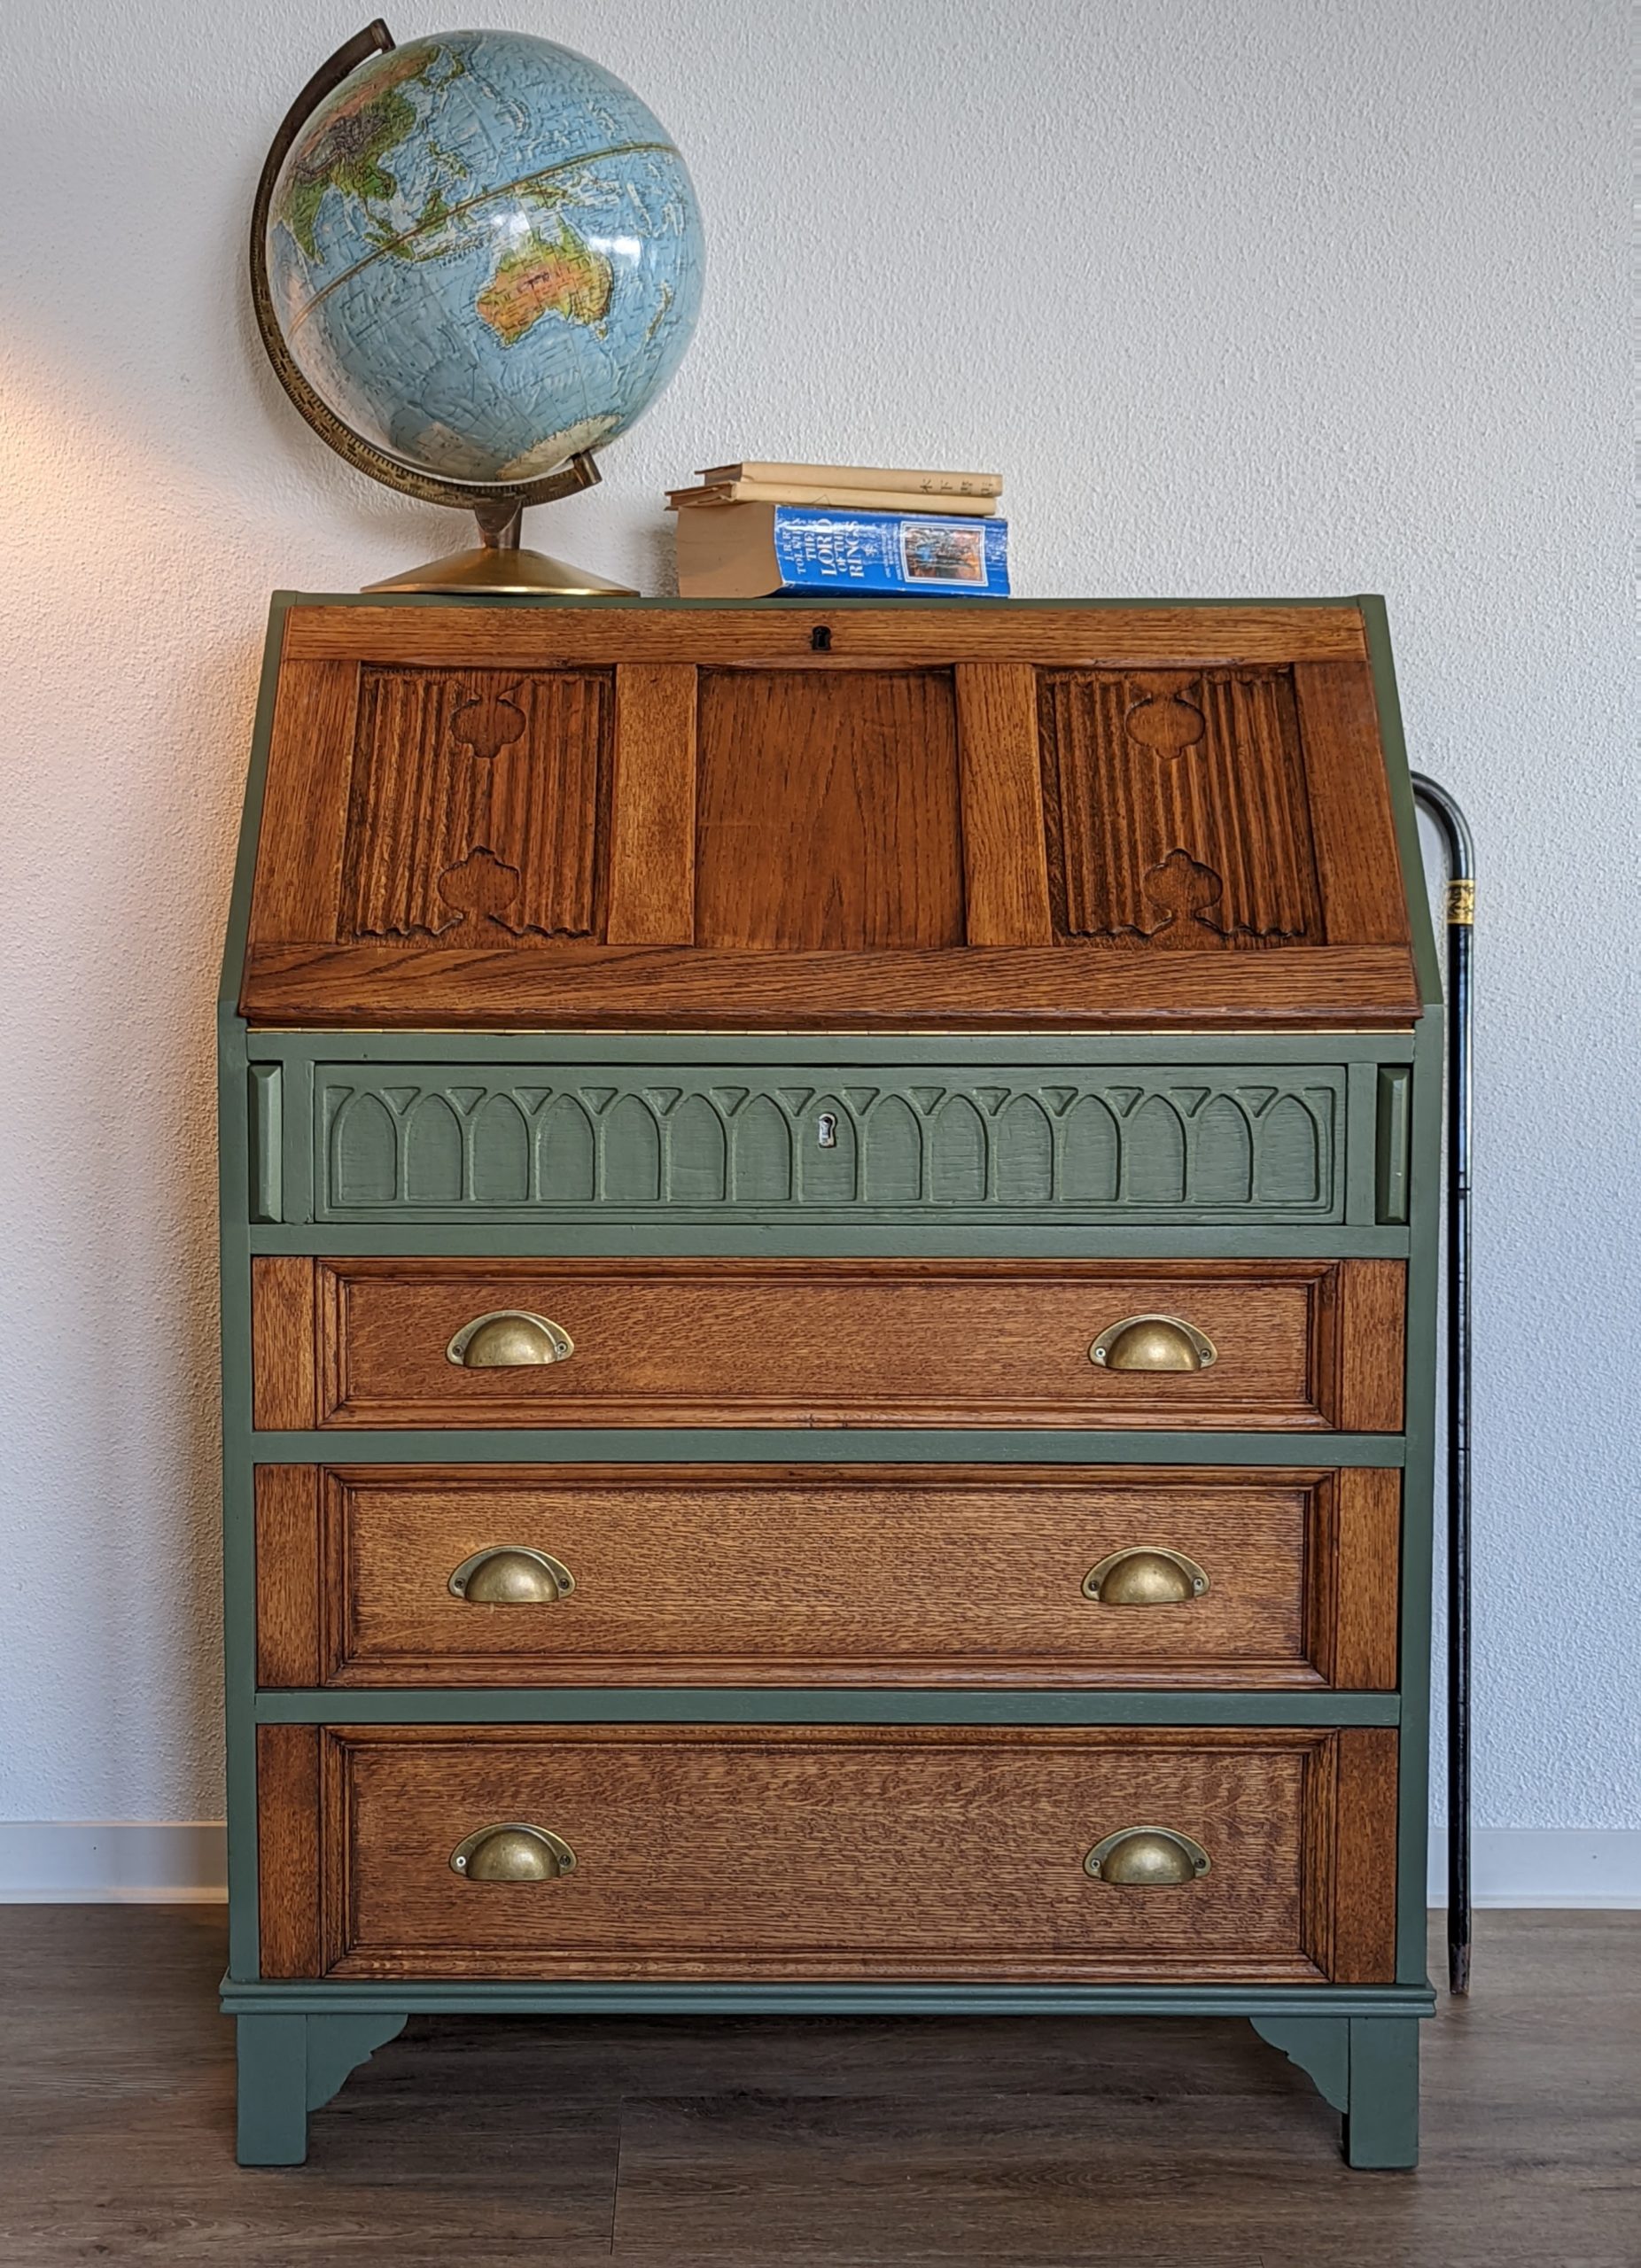 Vintage Secretary Given a Second Chance